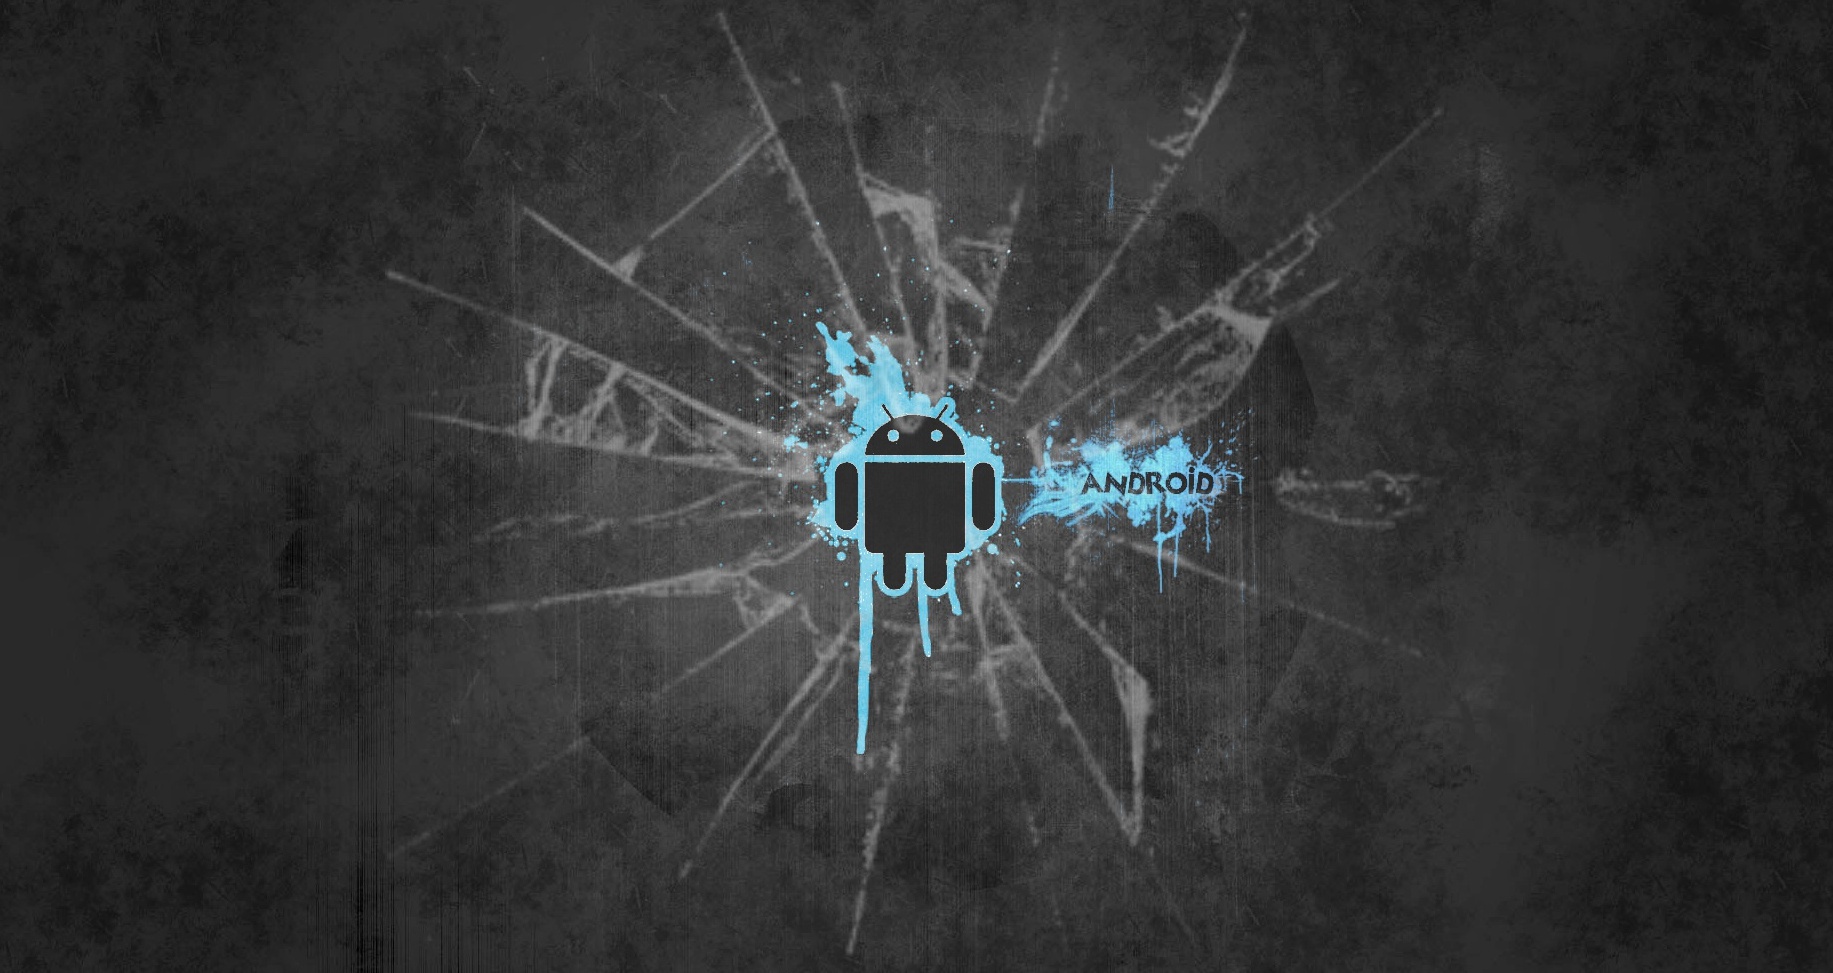 android-devices-vulnerable-to-certifi-gate-flaw-exploited-by-remote-support-apps-5